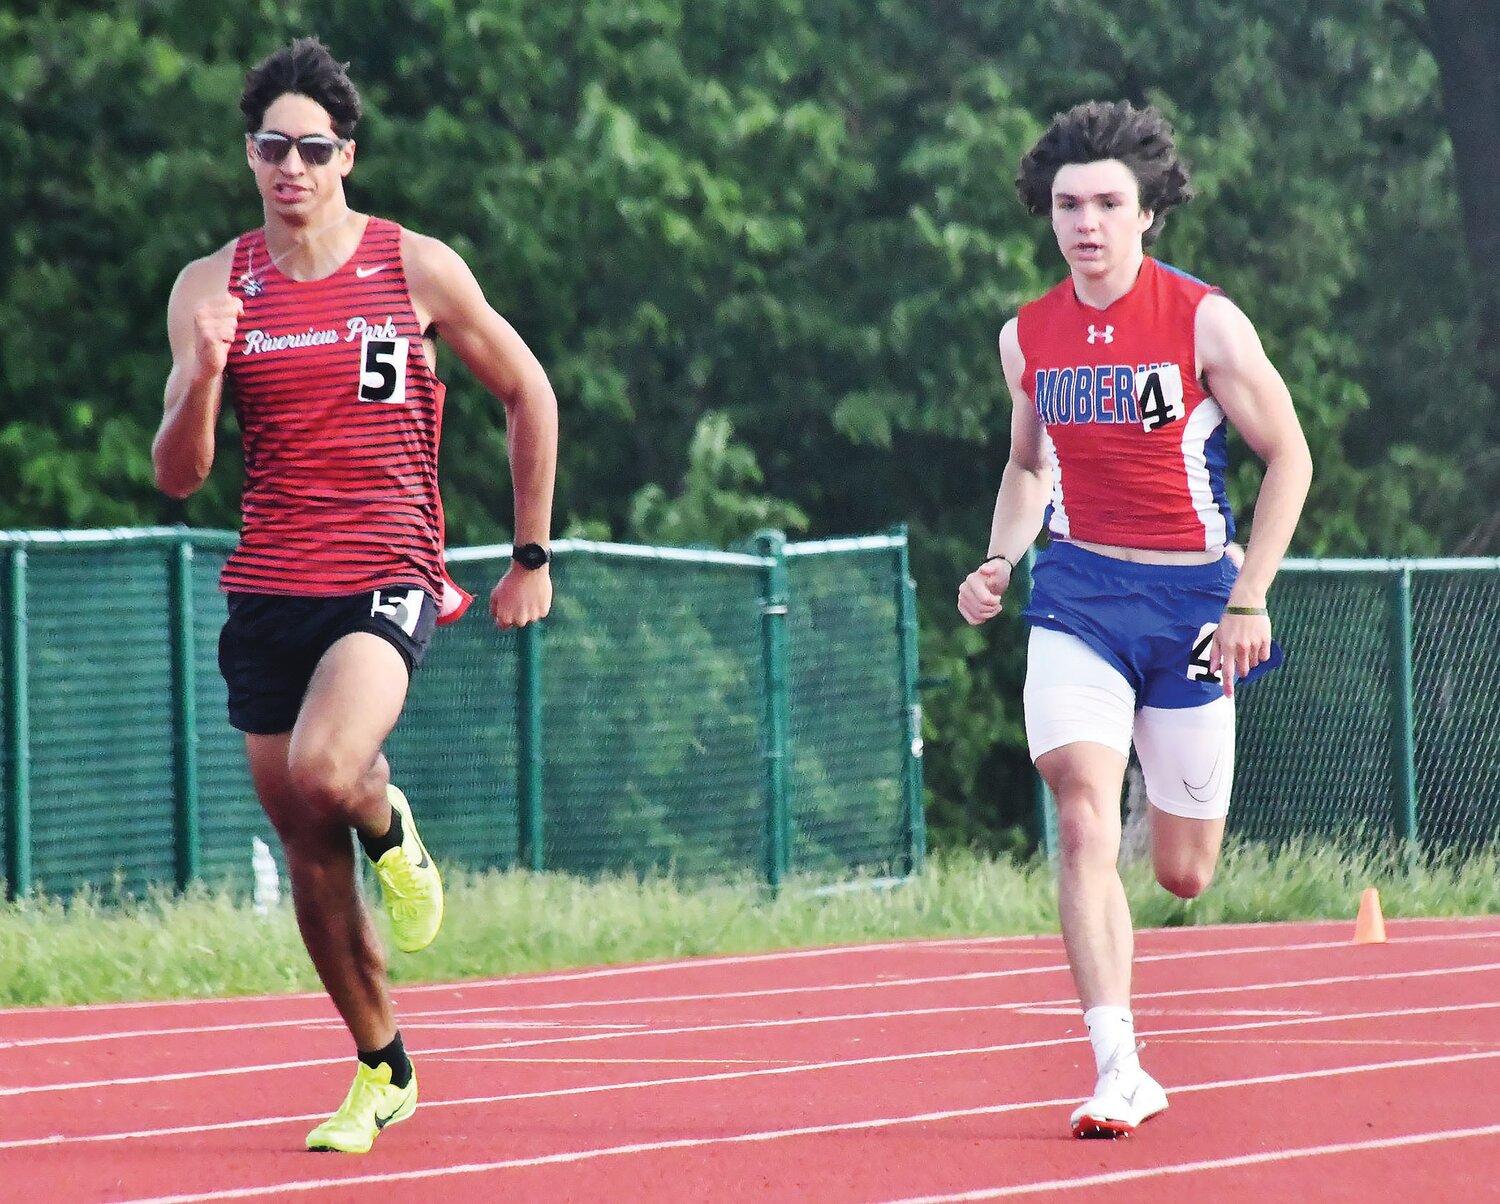 Moberly's Brett Gelina (right) competes versus a Hannibal runner during the 400-meter dash Saturday, May 13.